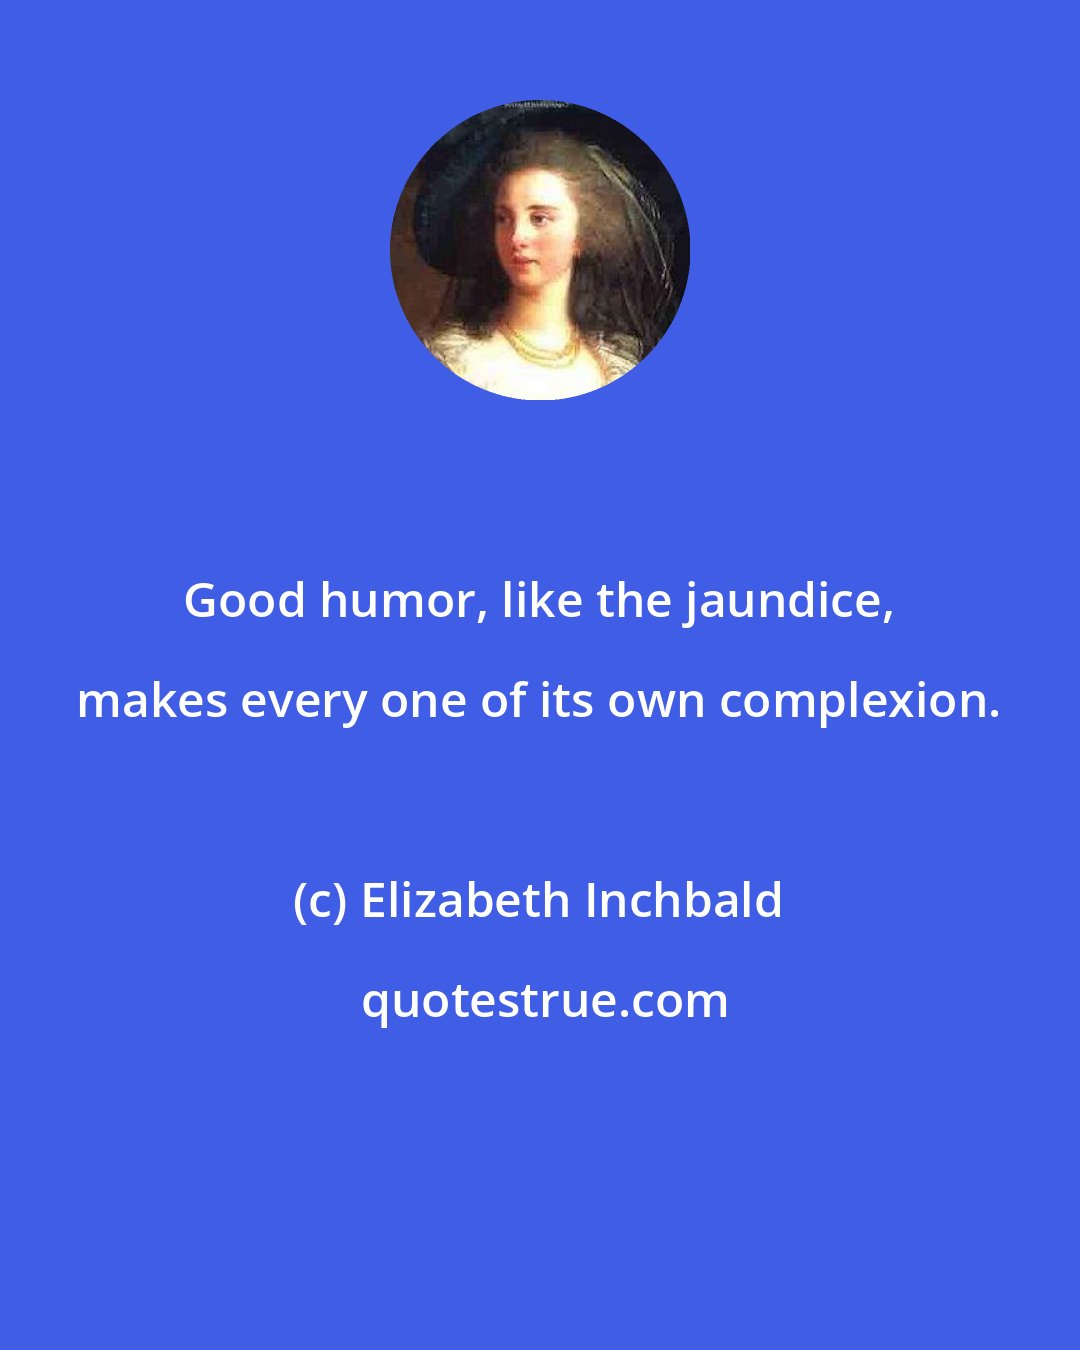 Elizabeth Inchbald: Good humor, like the jaundice, makes every one of its own complexion.